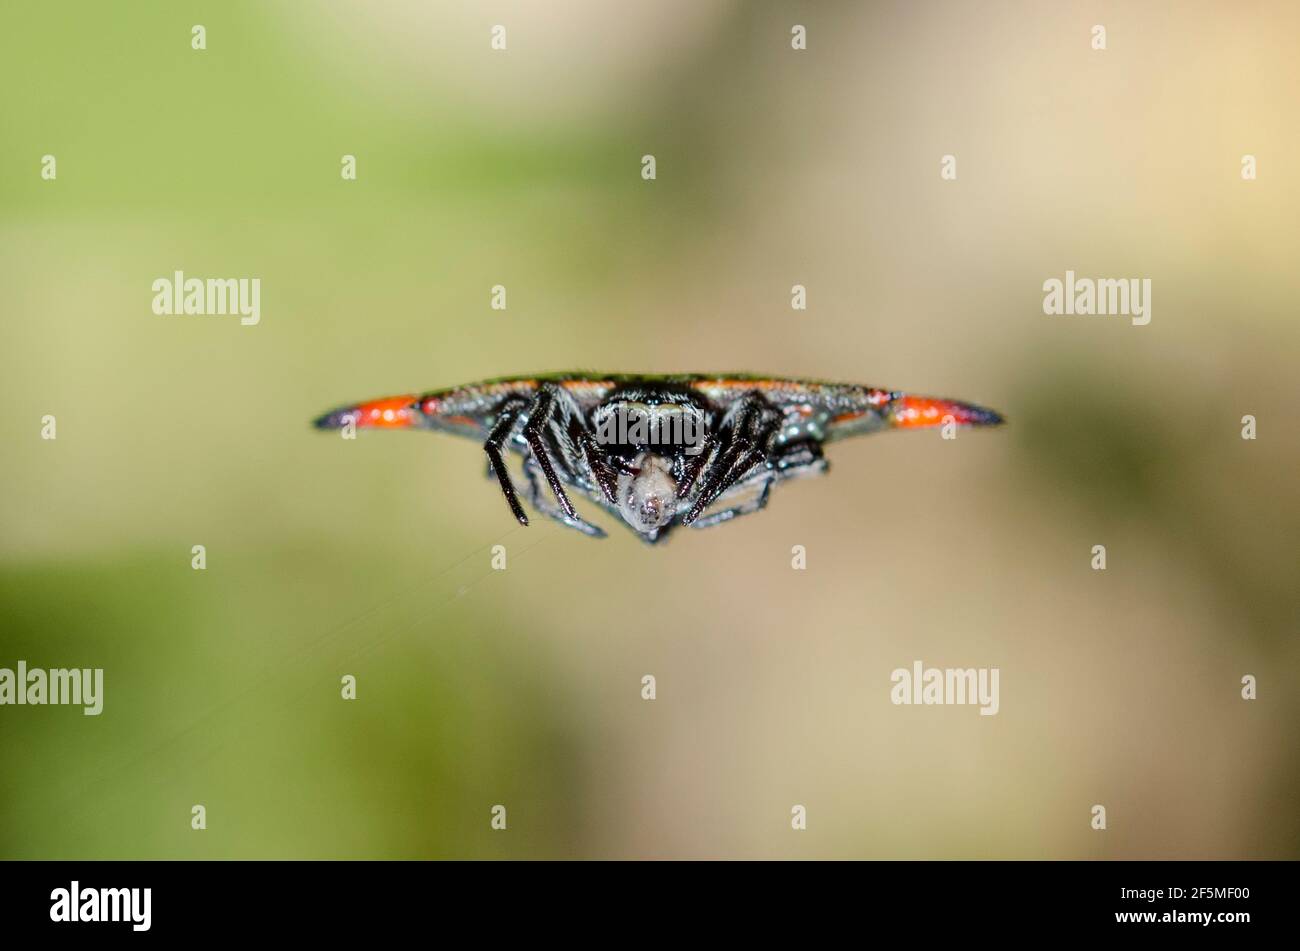 Crablike Spiny Orbweaver Spider, Gasteracantha cancriformis, on web, Klungkung, Bali, Indonesia Stock Photo